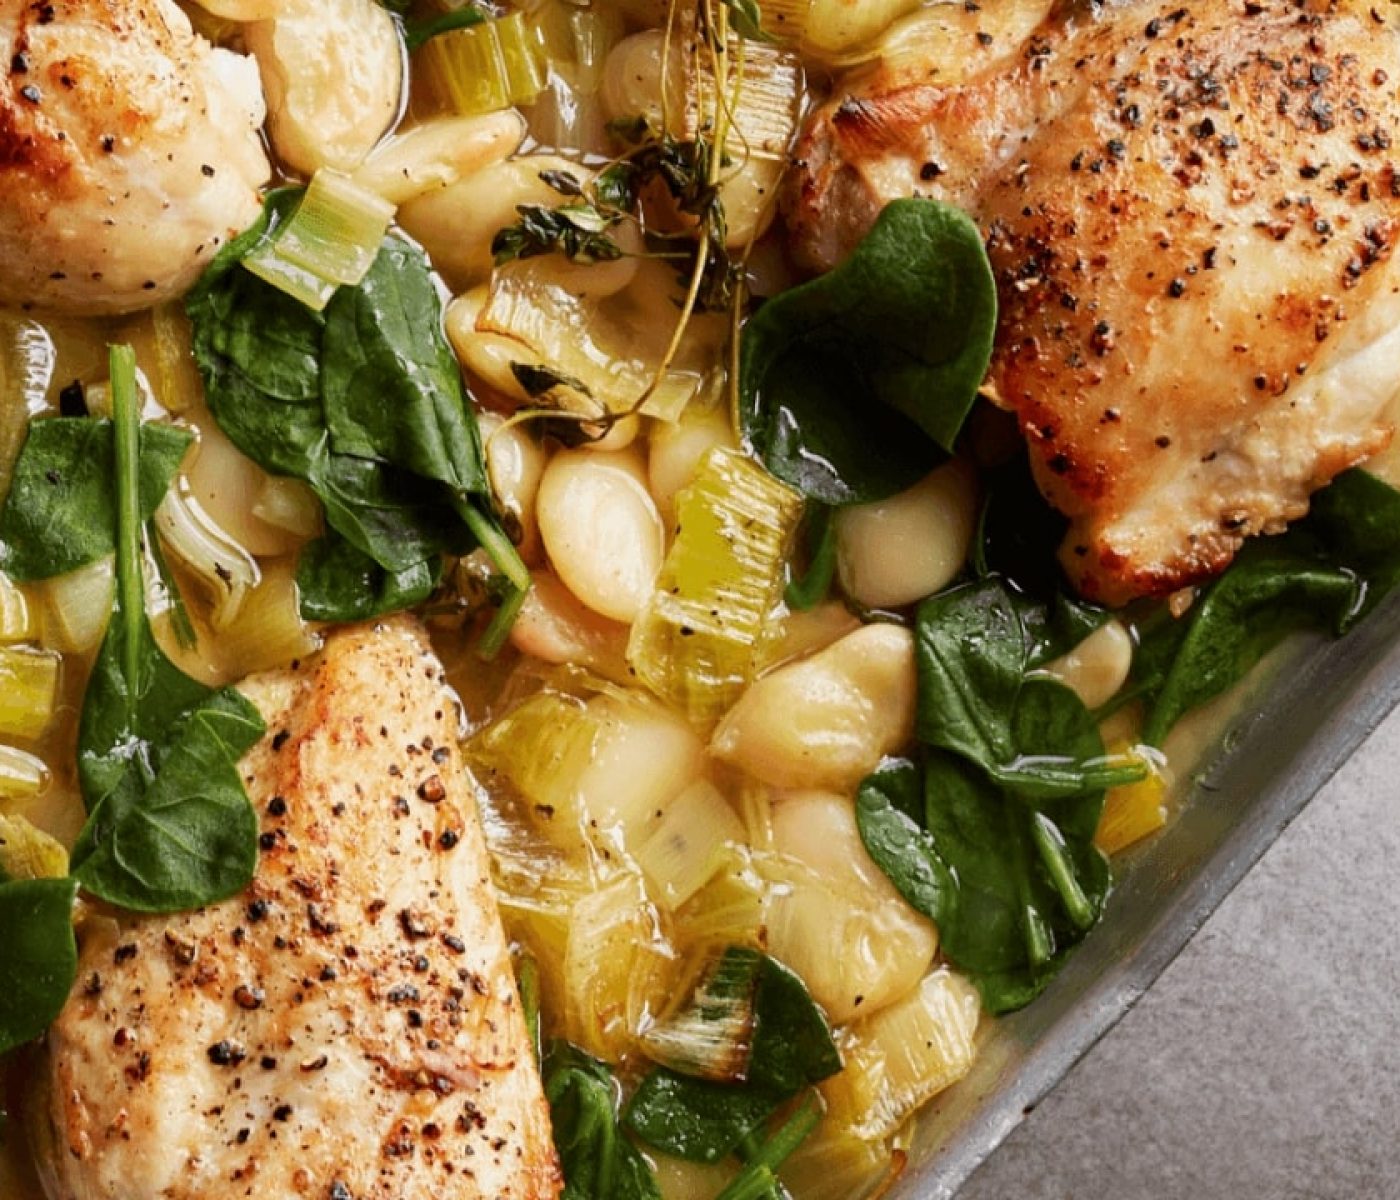 CroppedFocusedImage192072050-50-TRAY-BAKED-CHICKEN-WITH-BUTTER-BEANS-LEEKS-AND-SPINACH